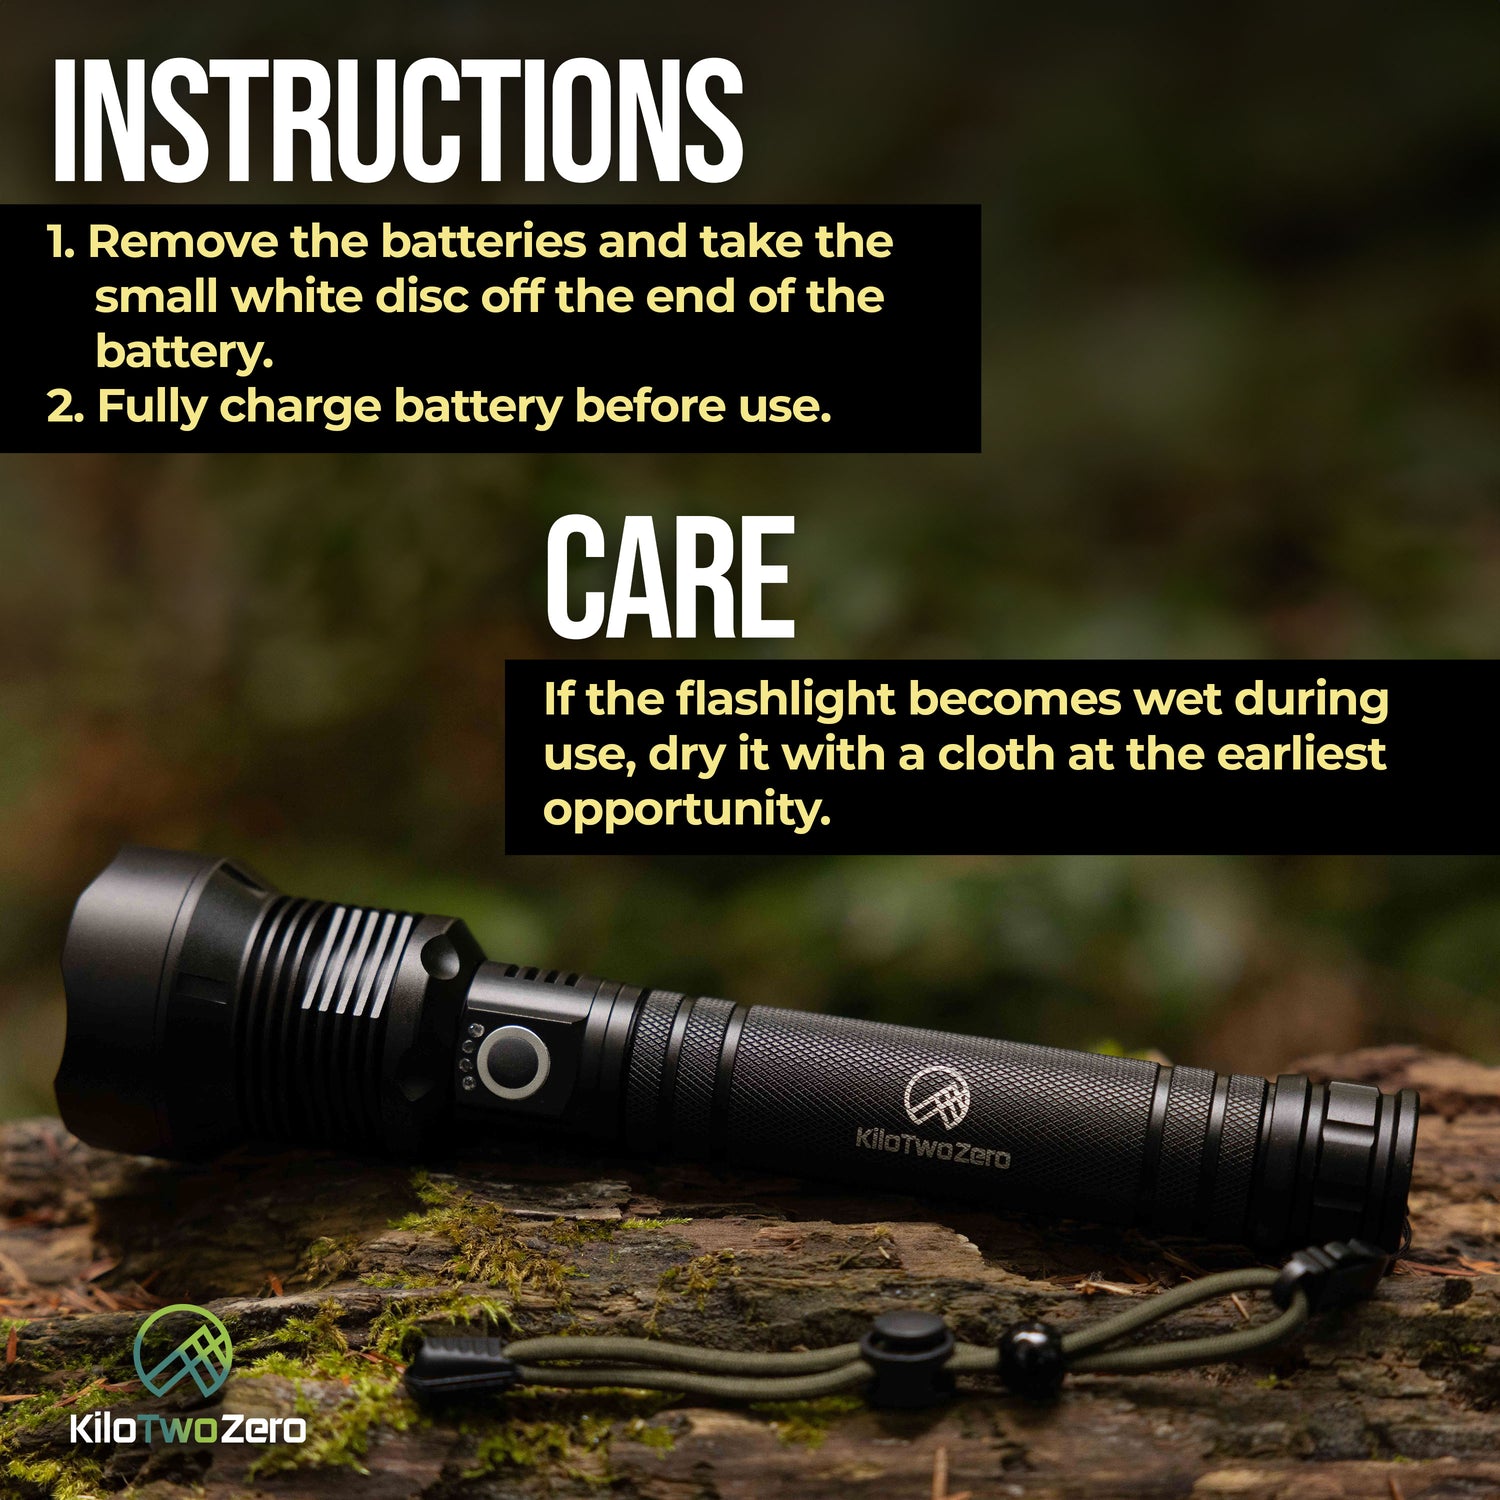 Guardian 2.0 Flashlight on a log with Instructions and Care information